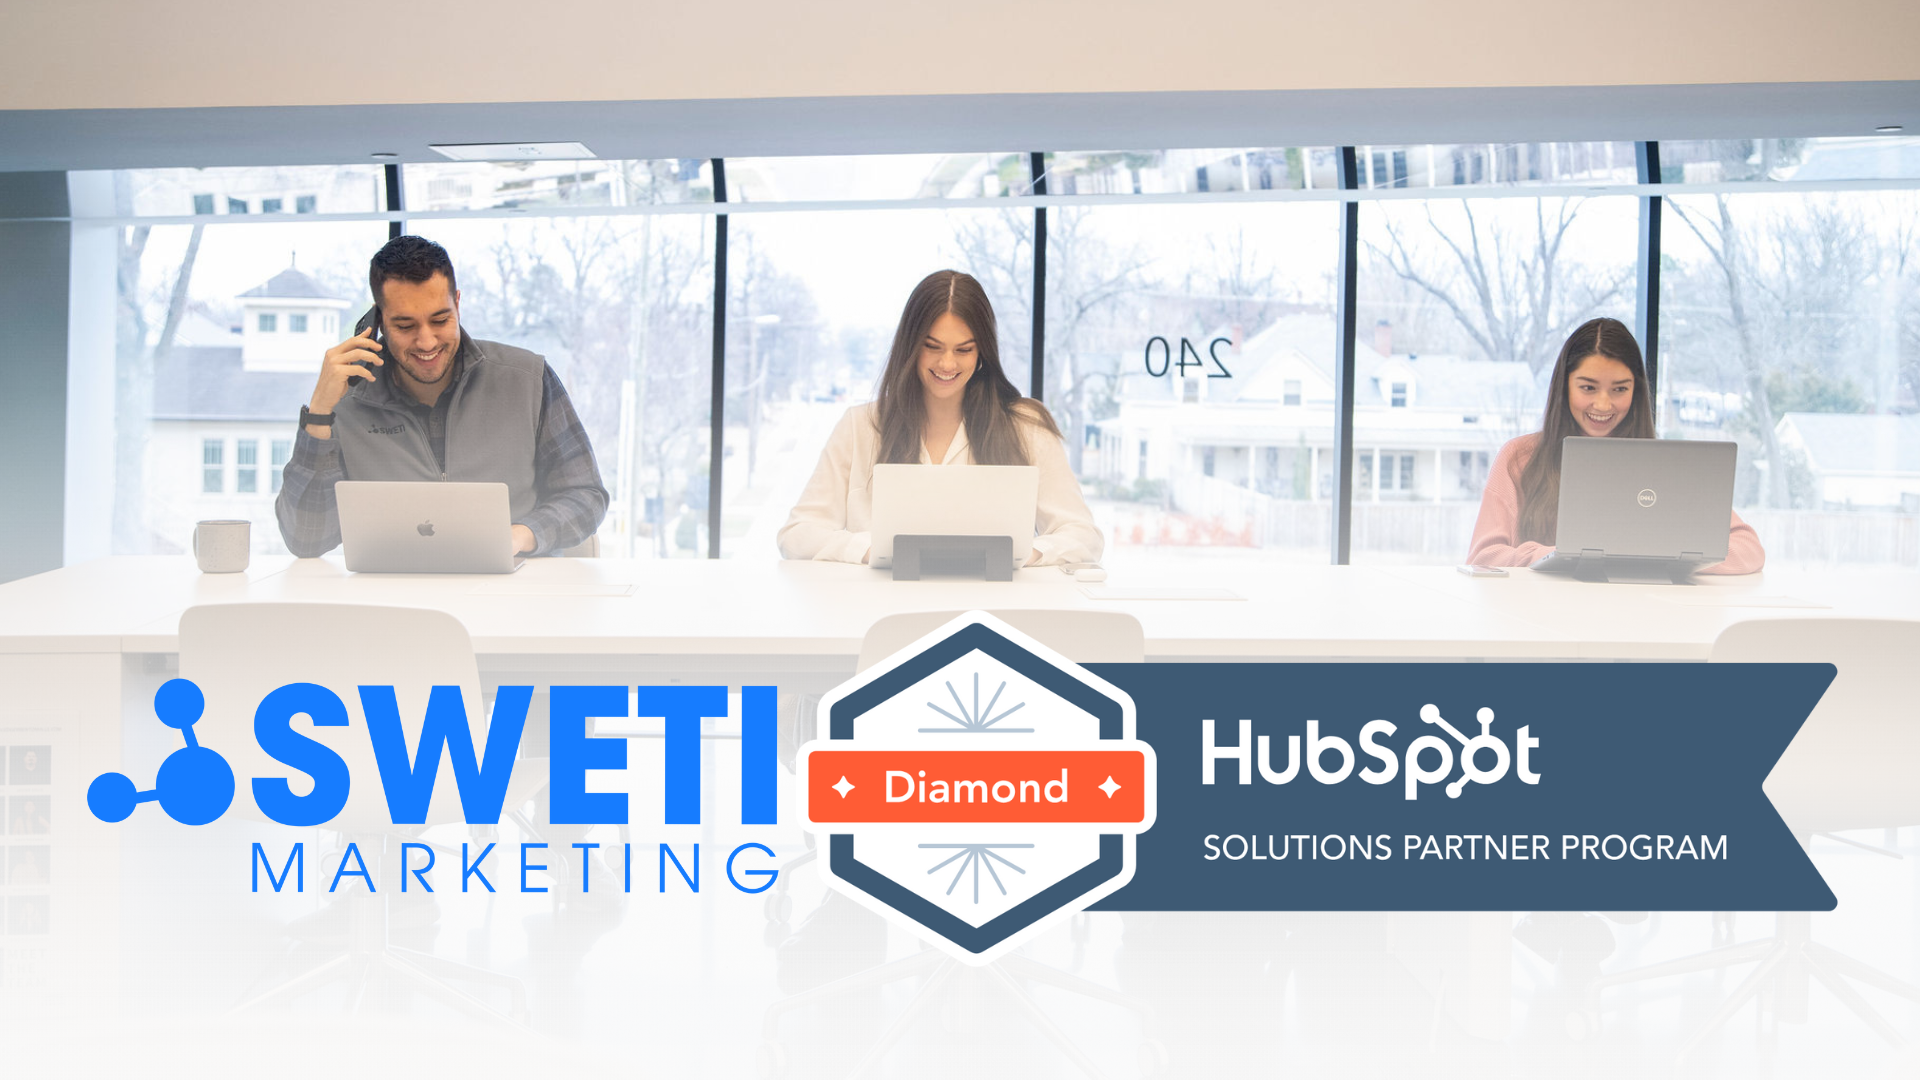 hubspot crm pricing plans